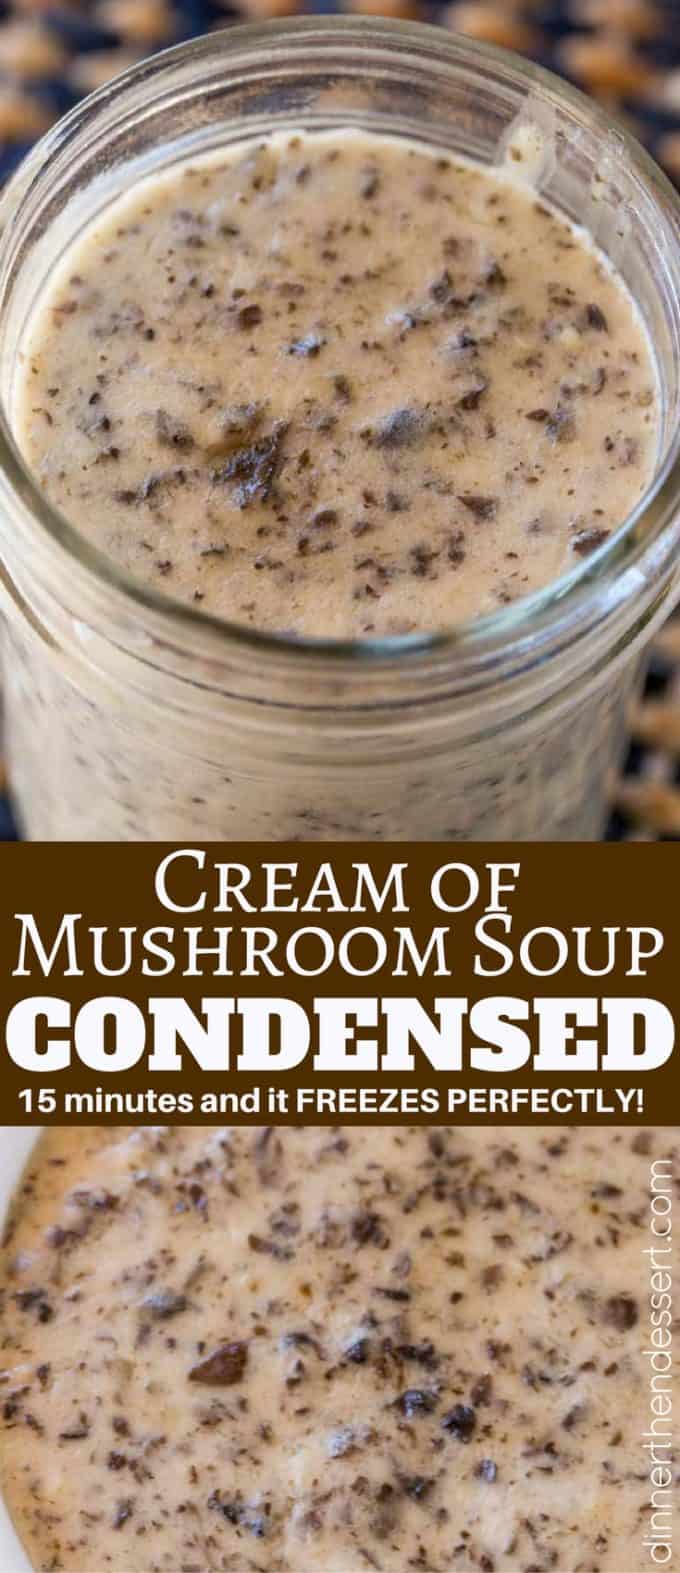 Cream of Mushroom Soup sounds like a basic ingredient in a casserole but making it from scratch is really easy and it freezes great. Perfect for all your condensed soup recipes!